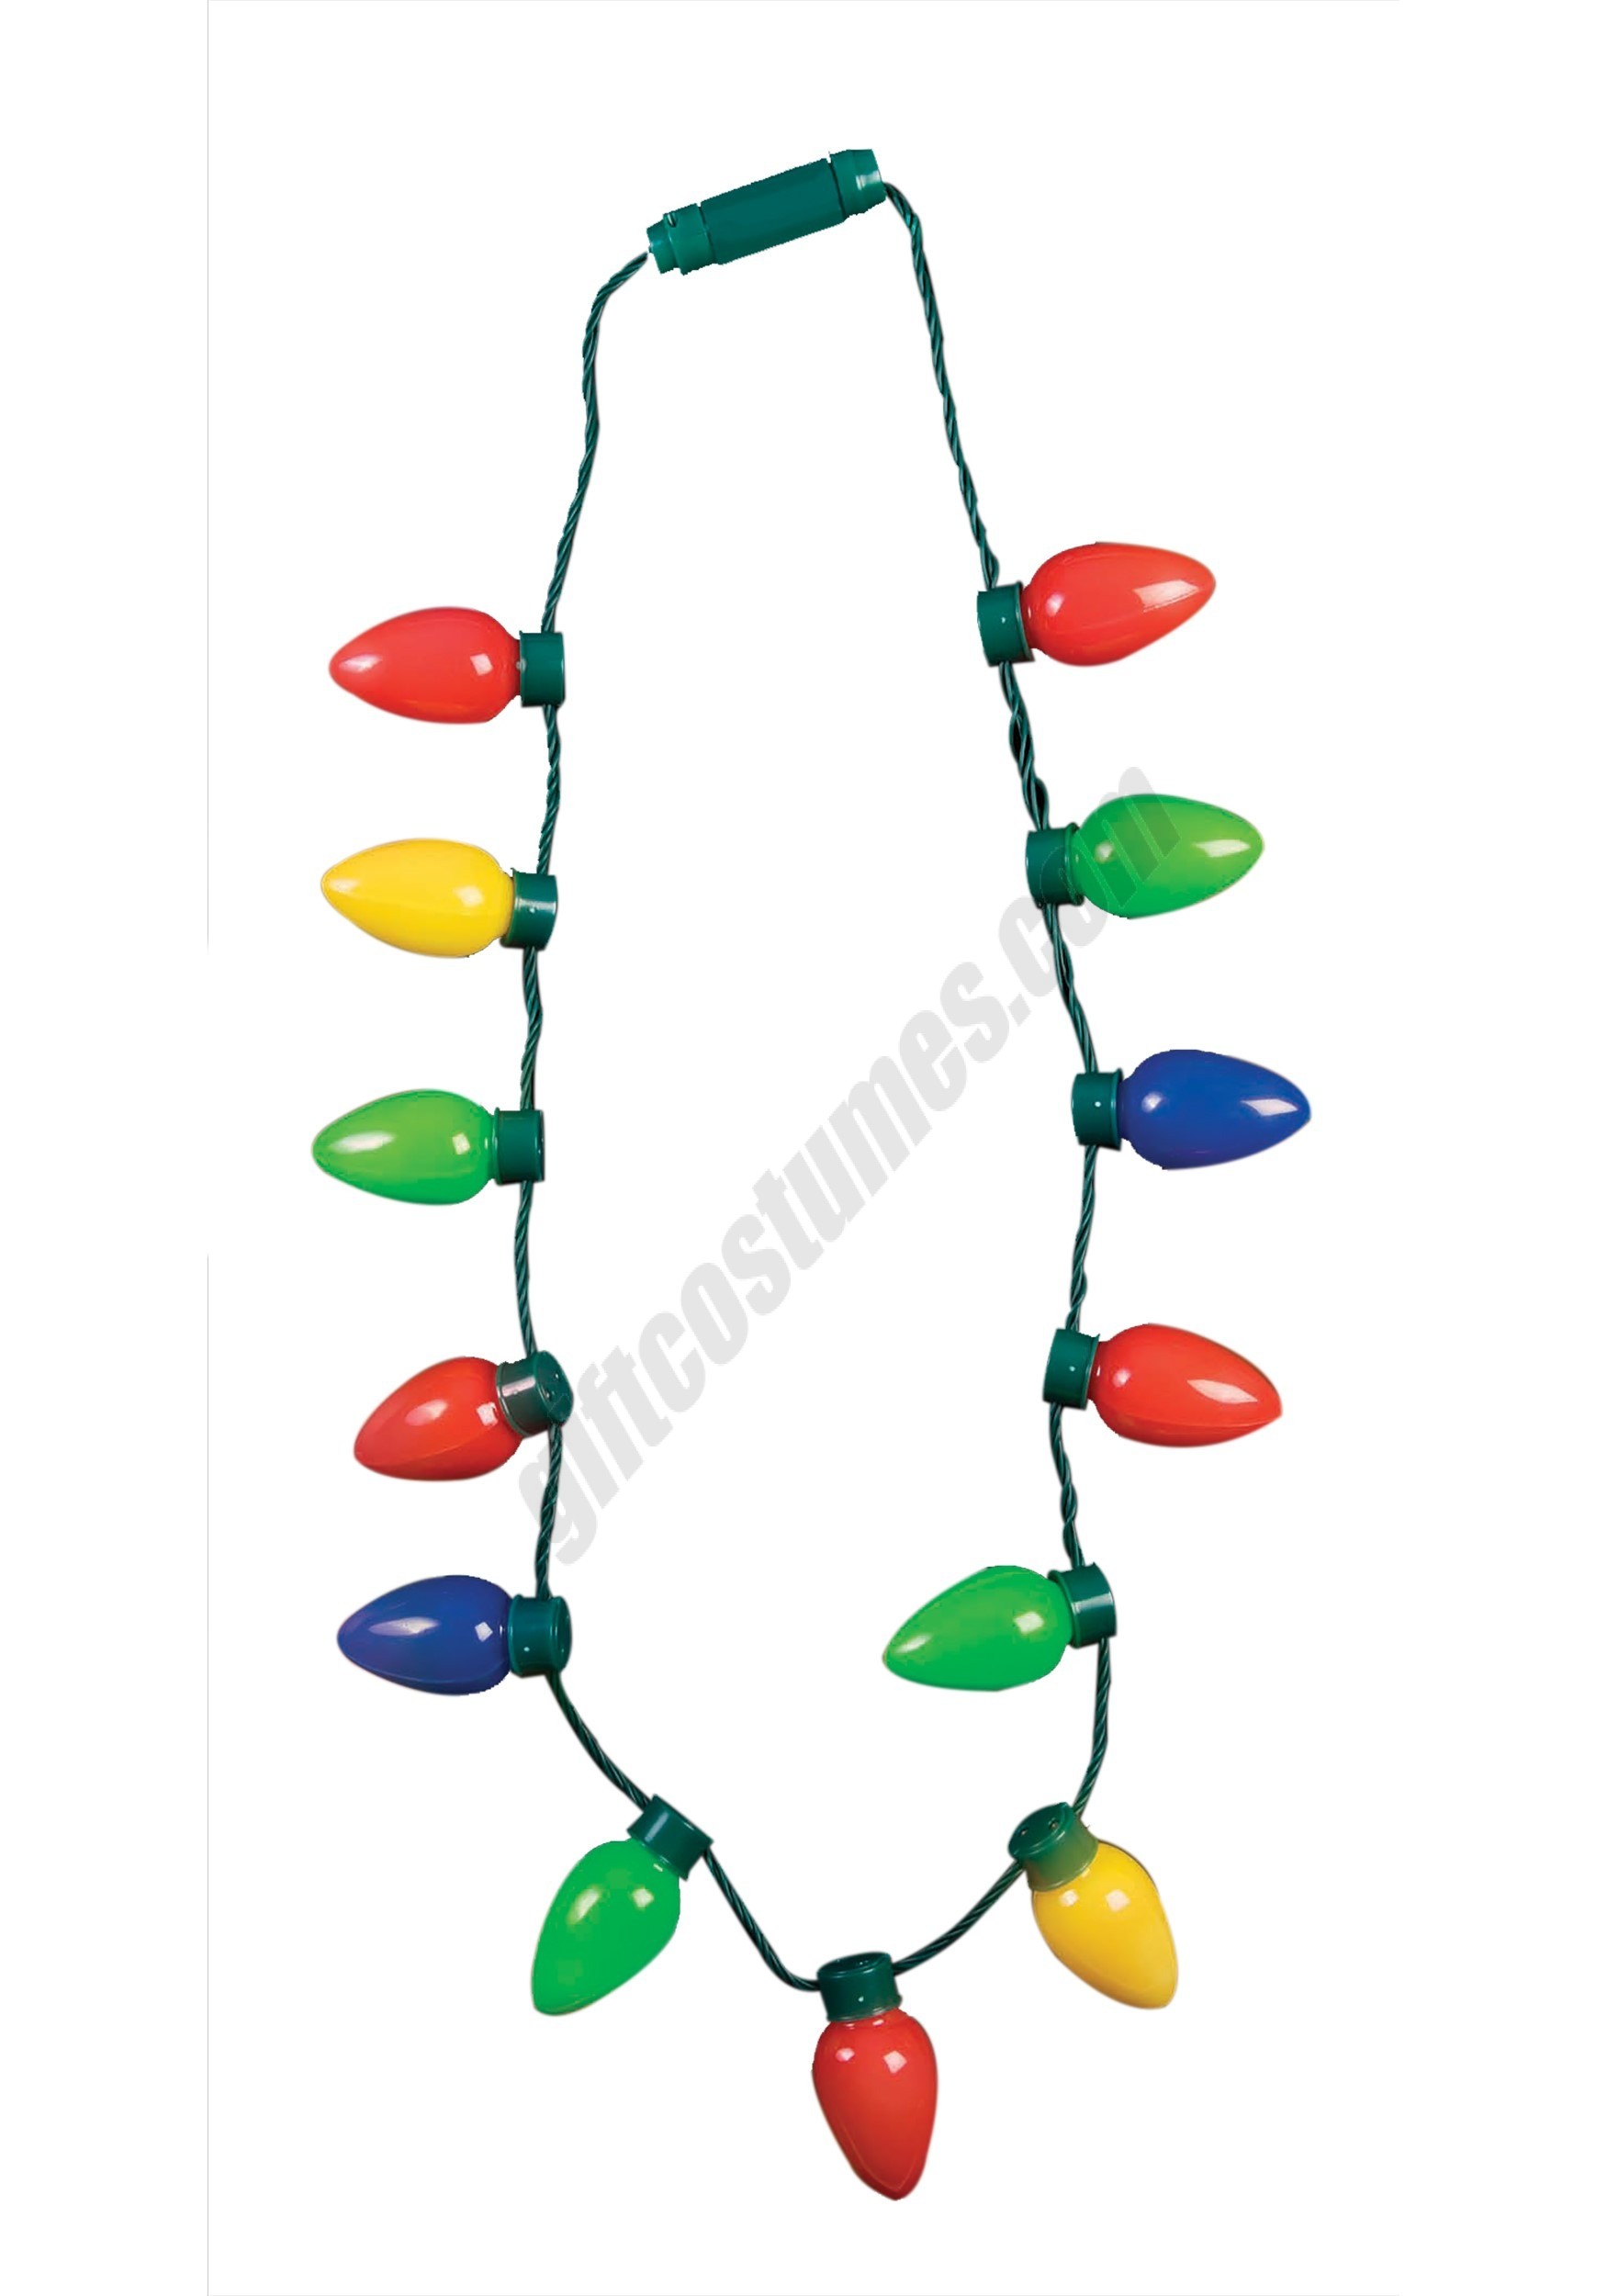 Christmas Bulb Light Up Necklace Promotions - Christmas Bulb Light Up Necklace Promotions